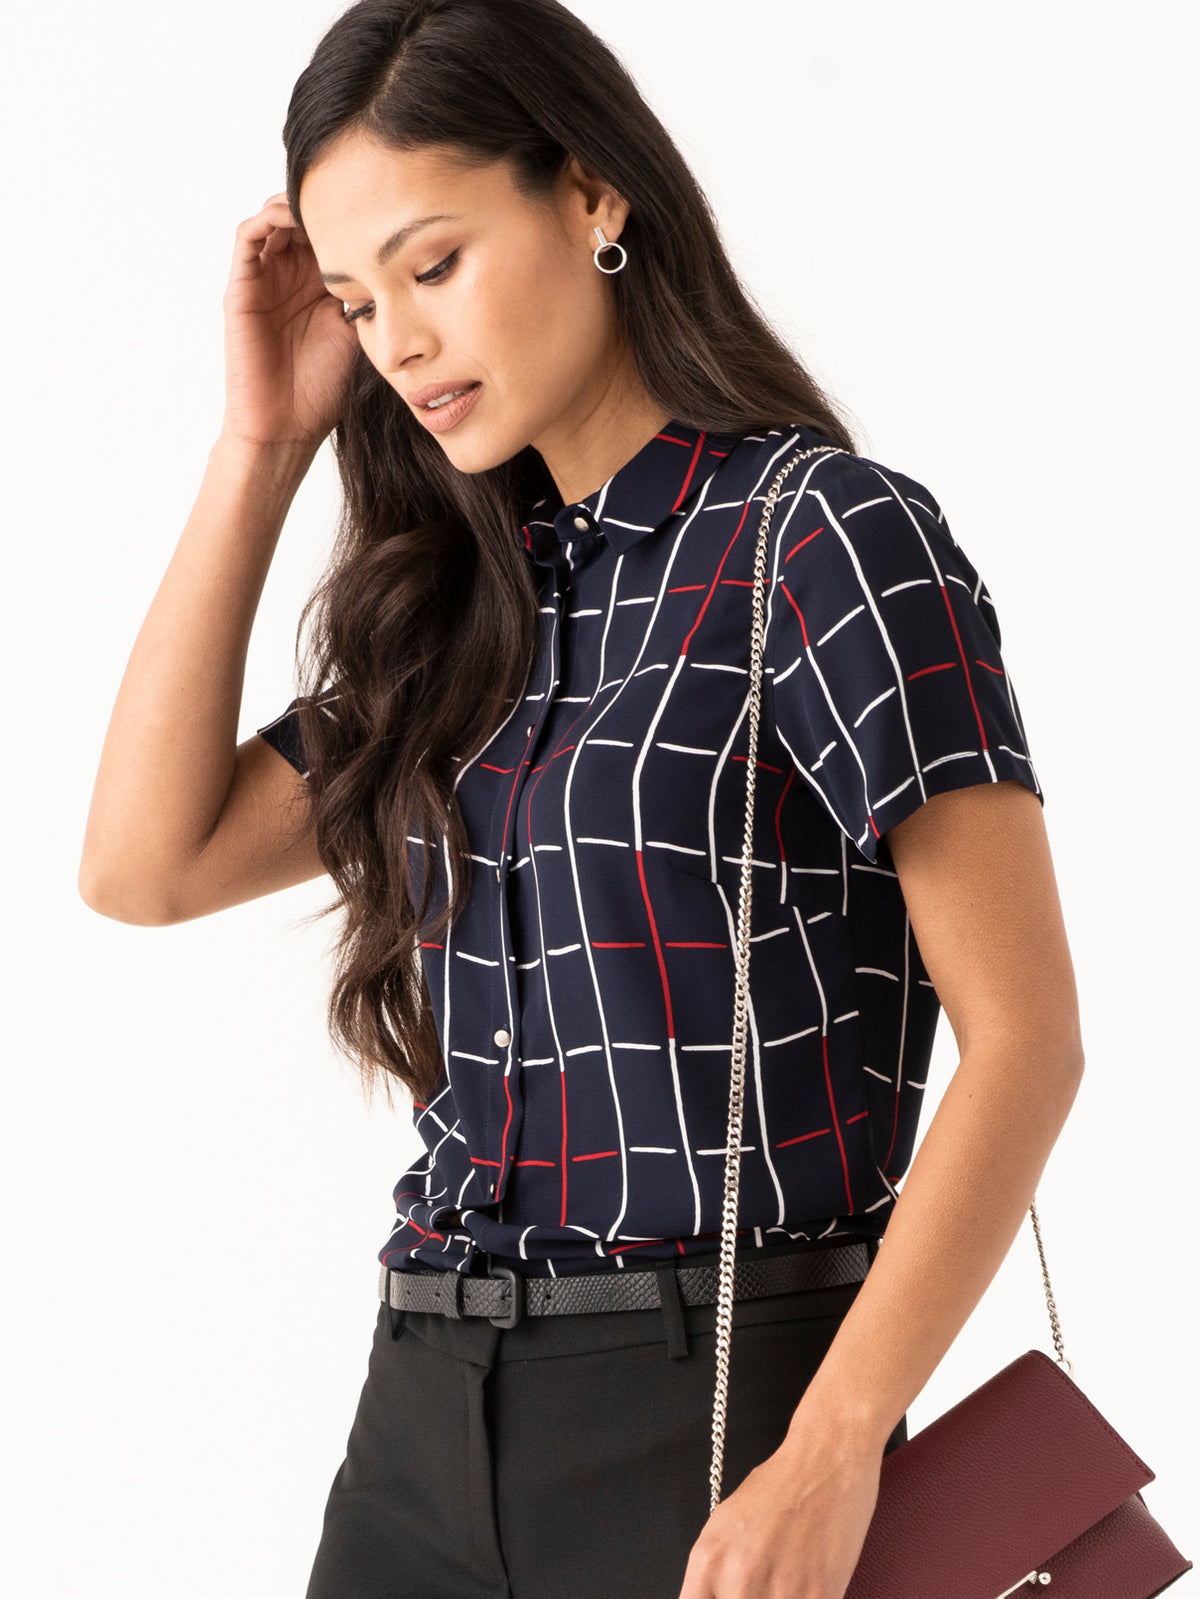 Carrie classic buttoned shirt - navy square print